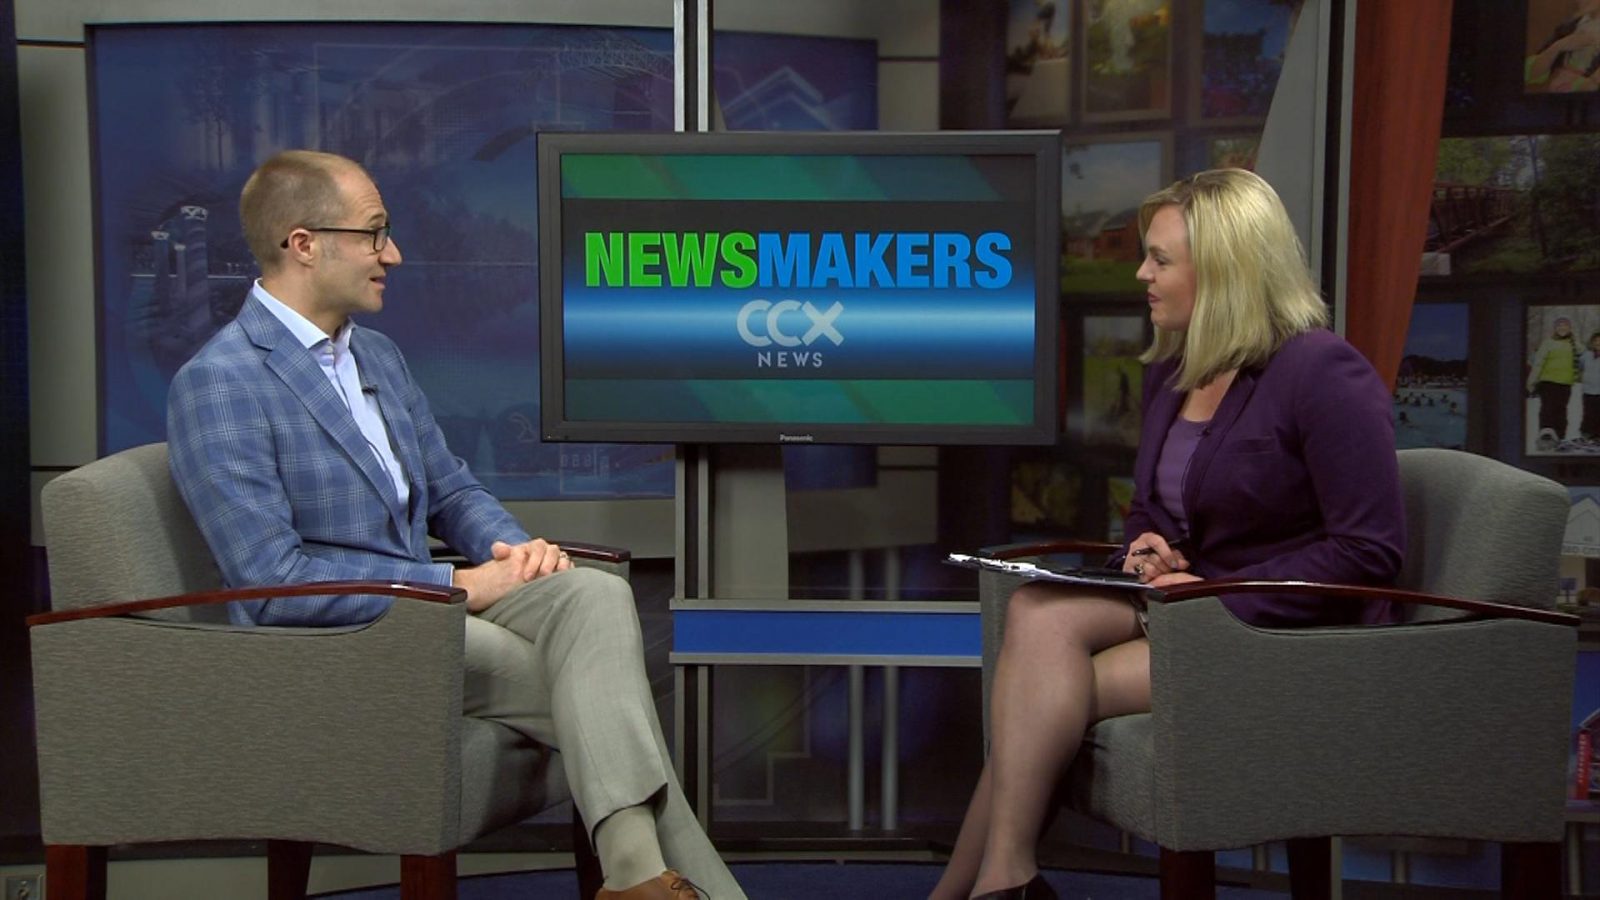 newsmakers-prairiecare-ceo-talks-about-pandemic-impact-on-children-s-mental-health-ccx-media